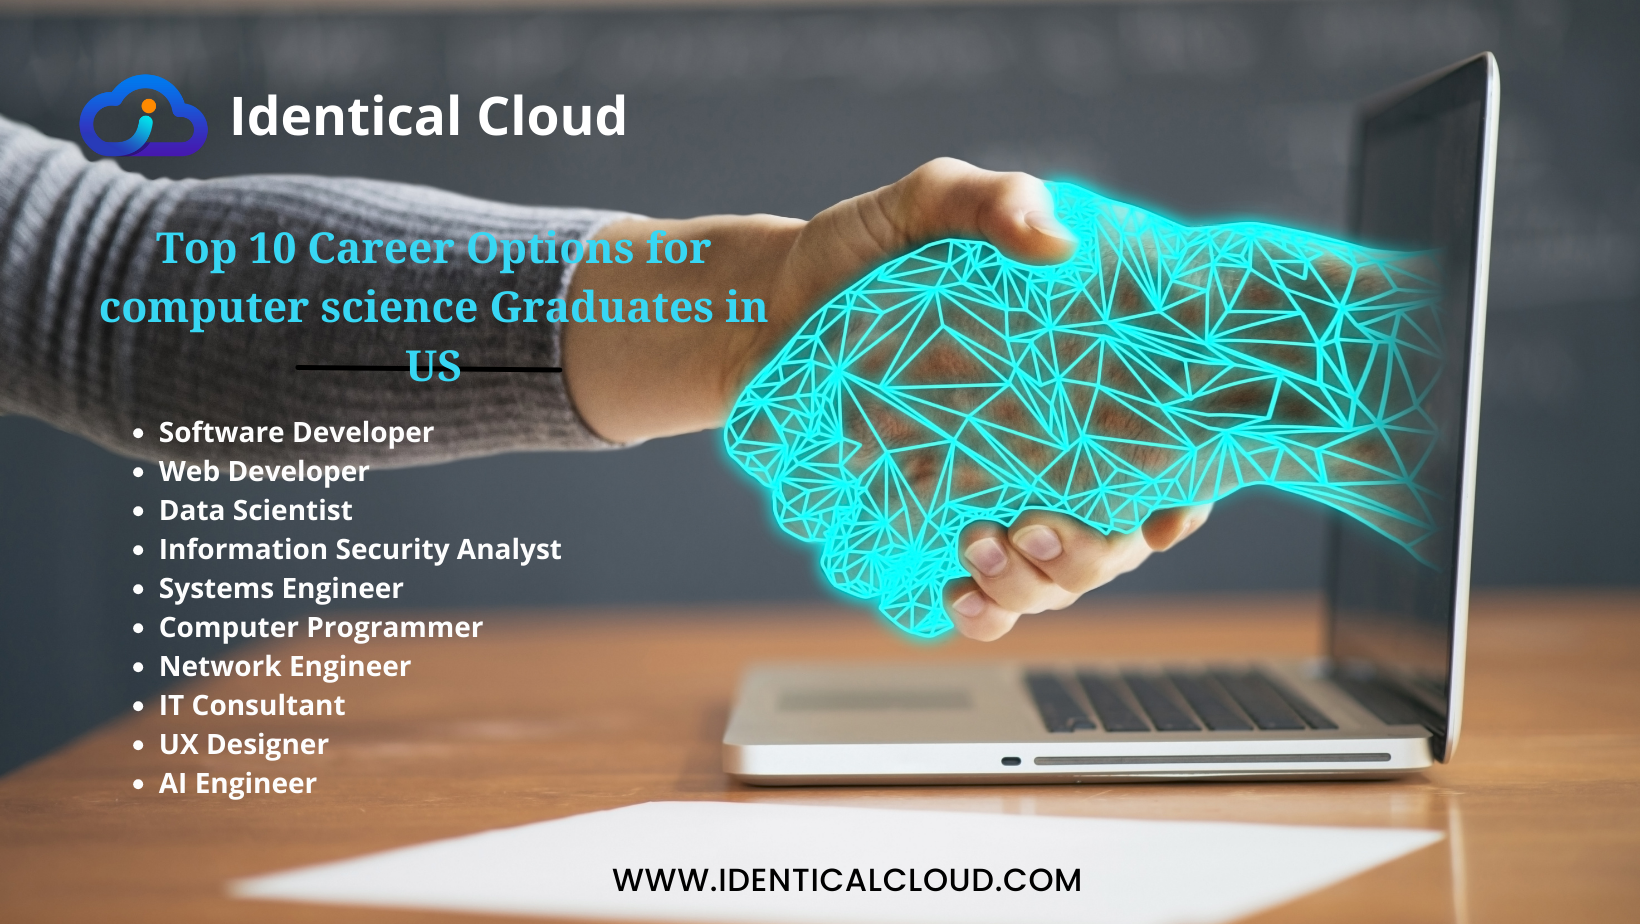 Top 10 Career Options for computer science Graduates in US - identicalcloud.com